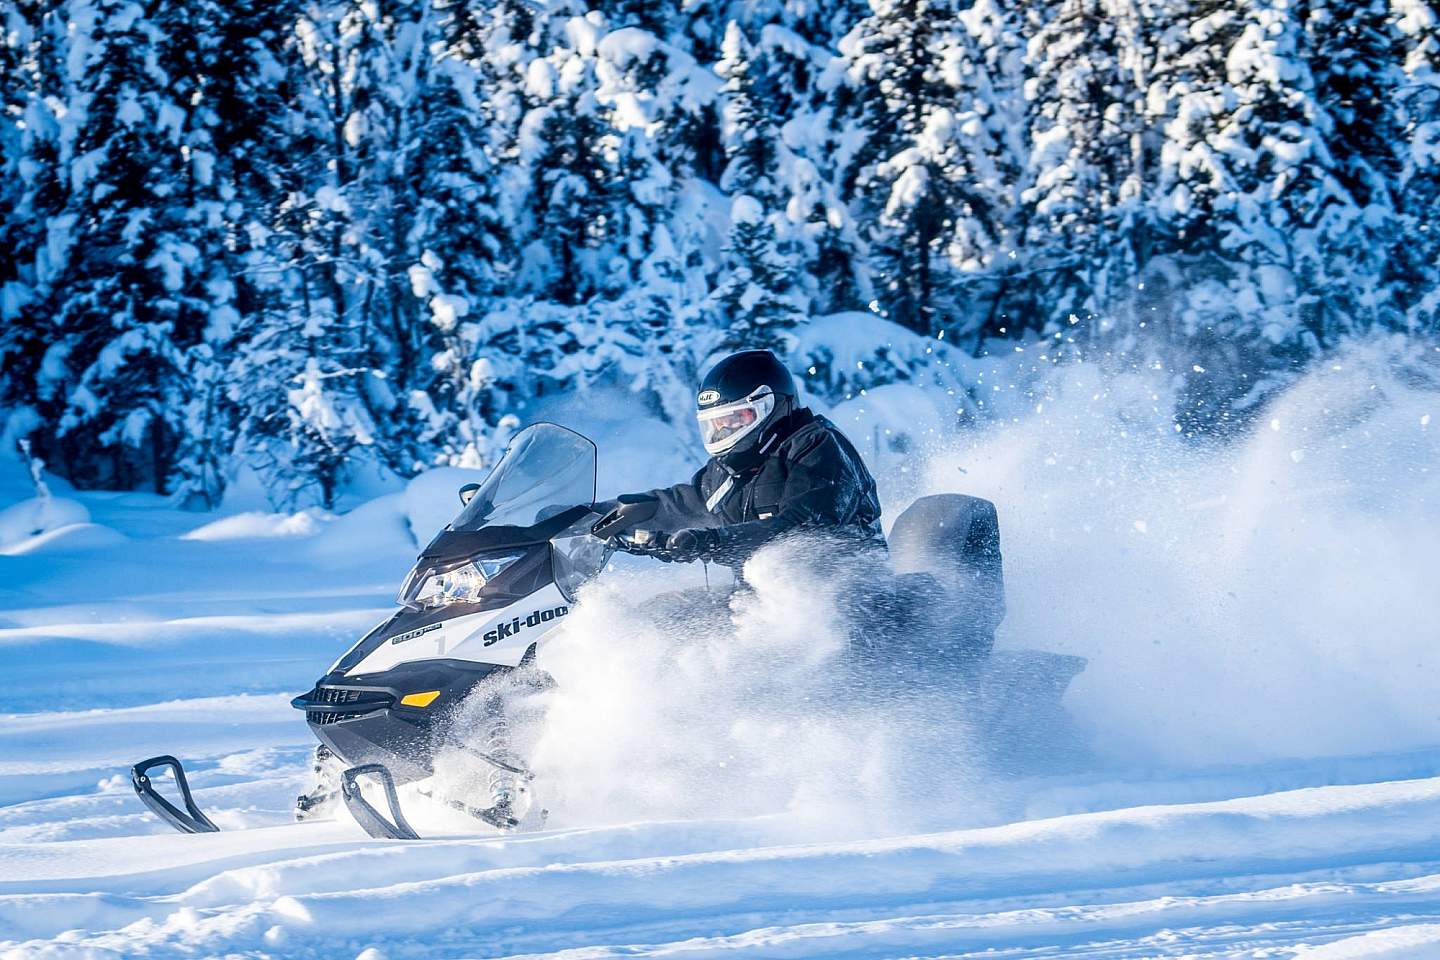 Someone on a snowmachining through the snow